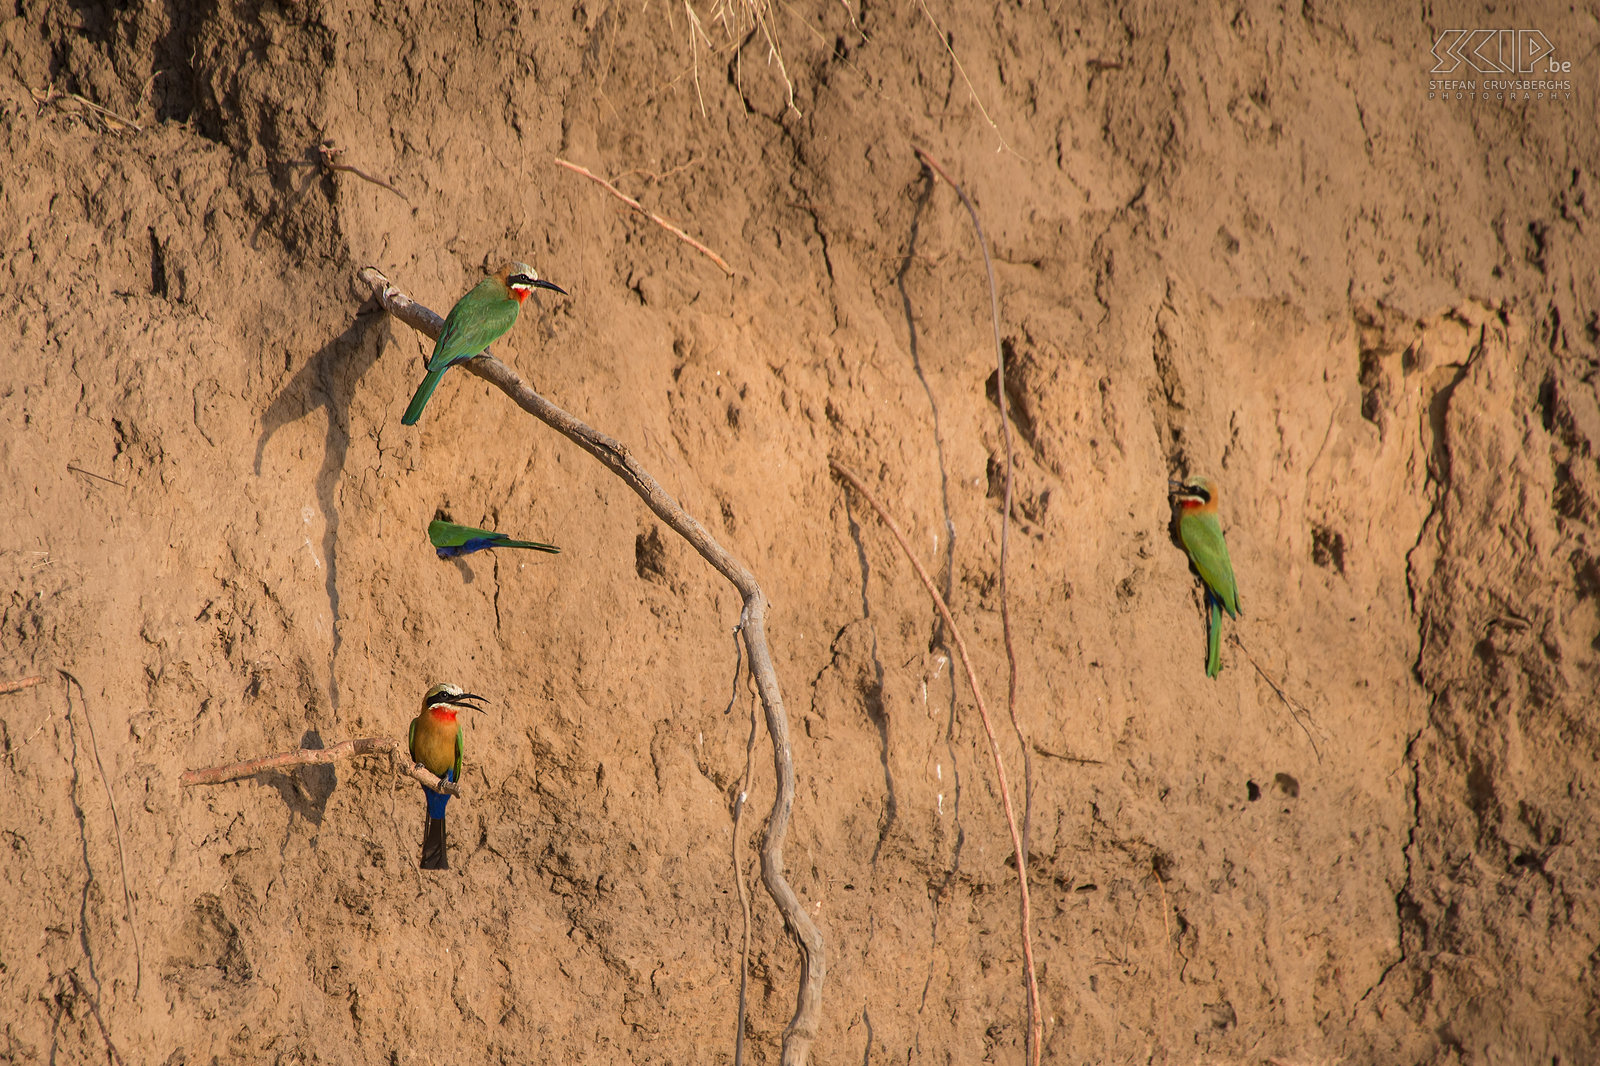 Lower Zambezi - White-fronted bee-eaters In the late afternoon we went on ‘sunset cruise’ with a small boat. The Zambezi and Kafue rivers flow together here. In the high river banks there are a lot of nests of bee-eaters. Especially the beautiful white-fronted bee-eaters (Merops bullockoides) were very busy catching insects such as dragonflies, grasshoppers, wasps, bumblebees, beetles, ... Stefan Cruysberghs